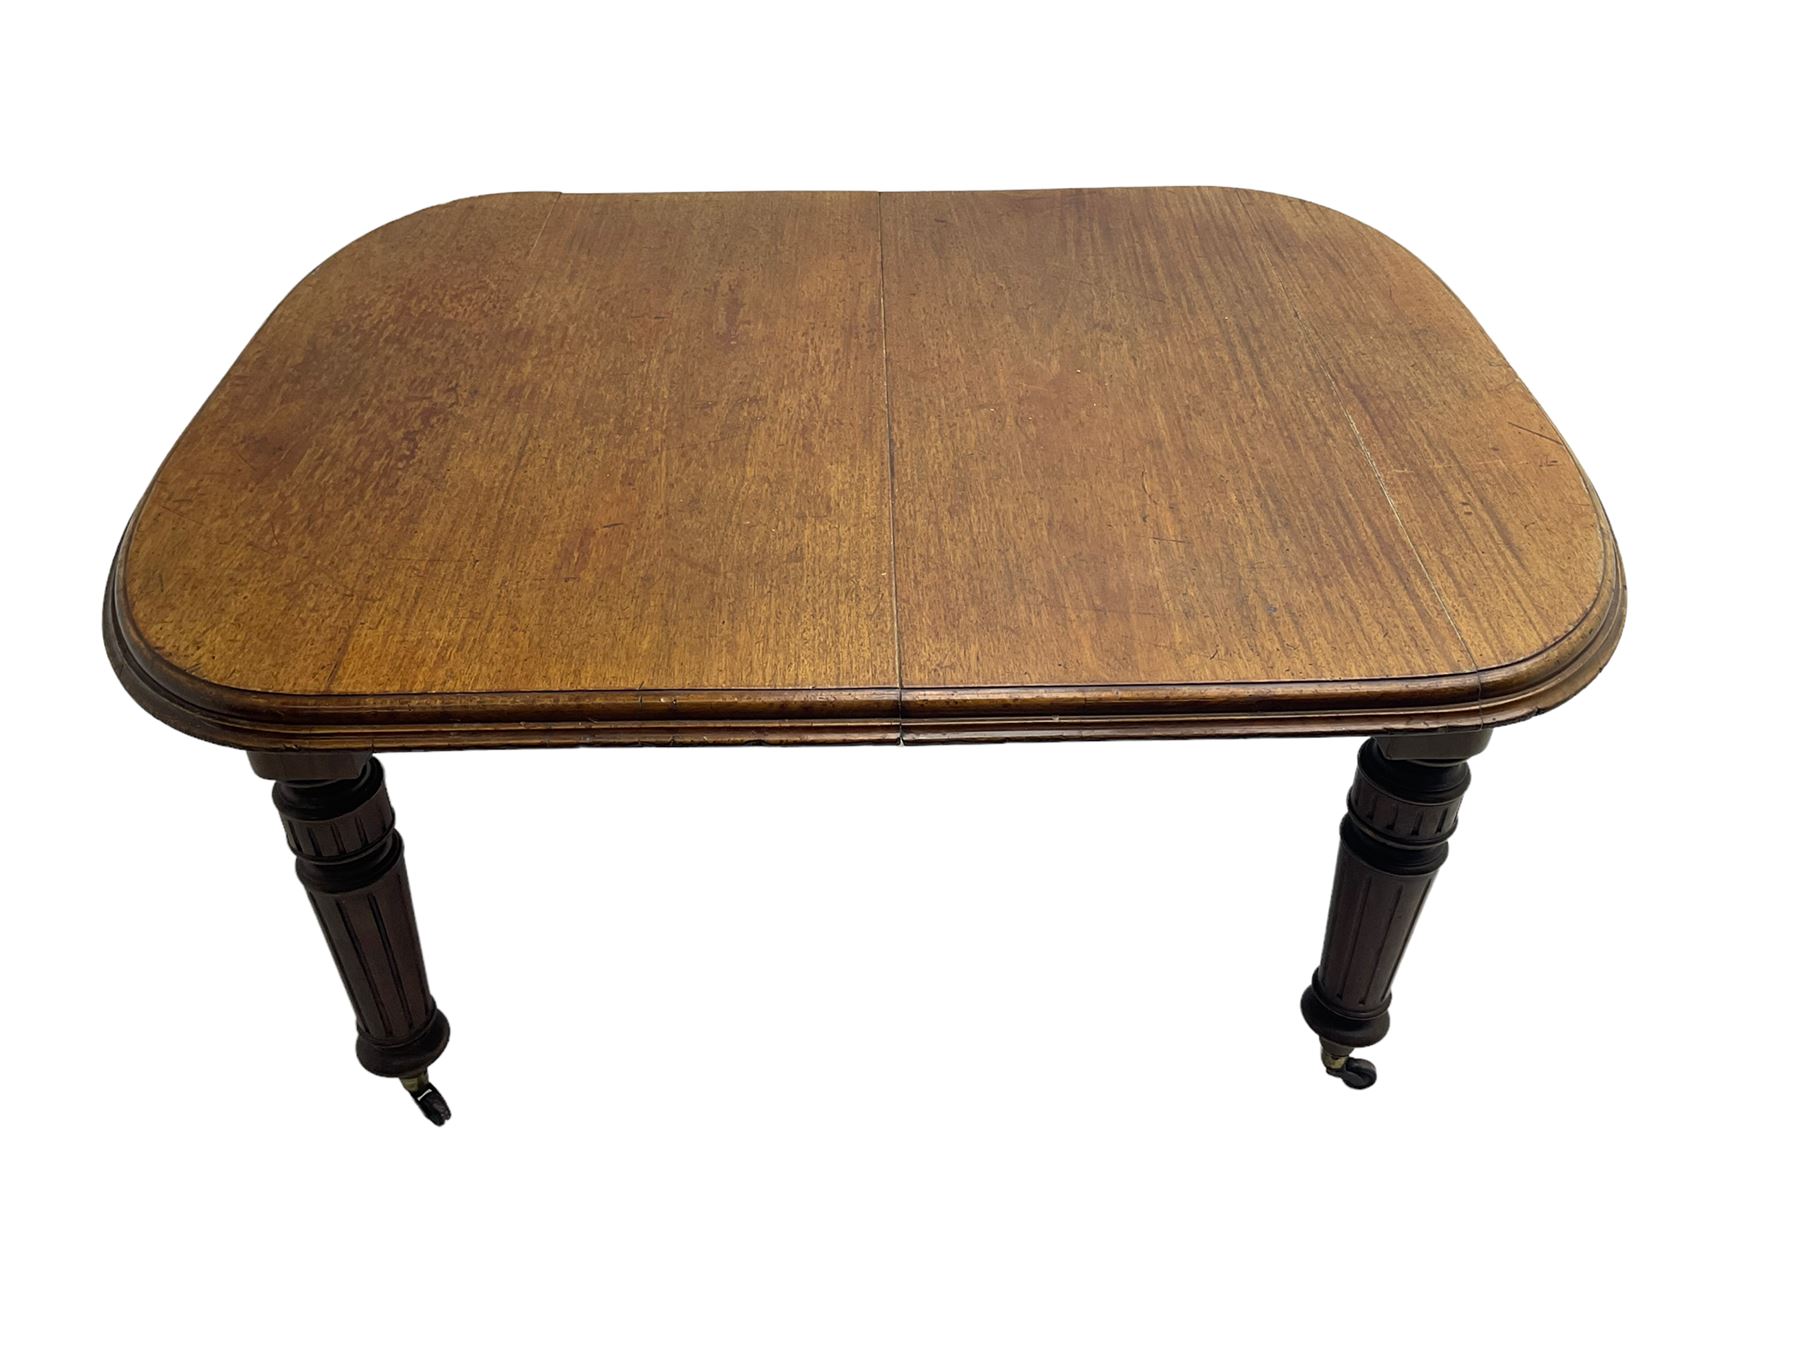 19th century mahogany extending dining table - Image 6 of 6